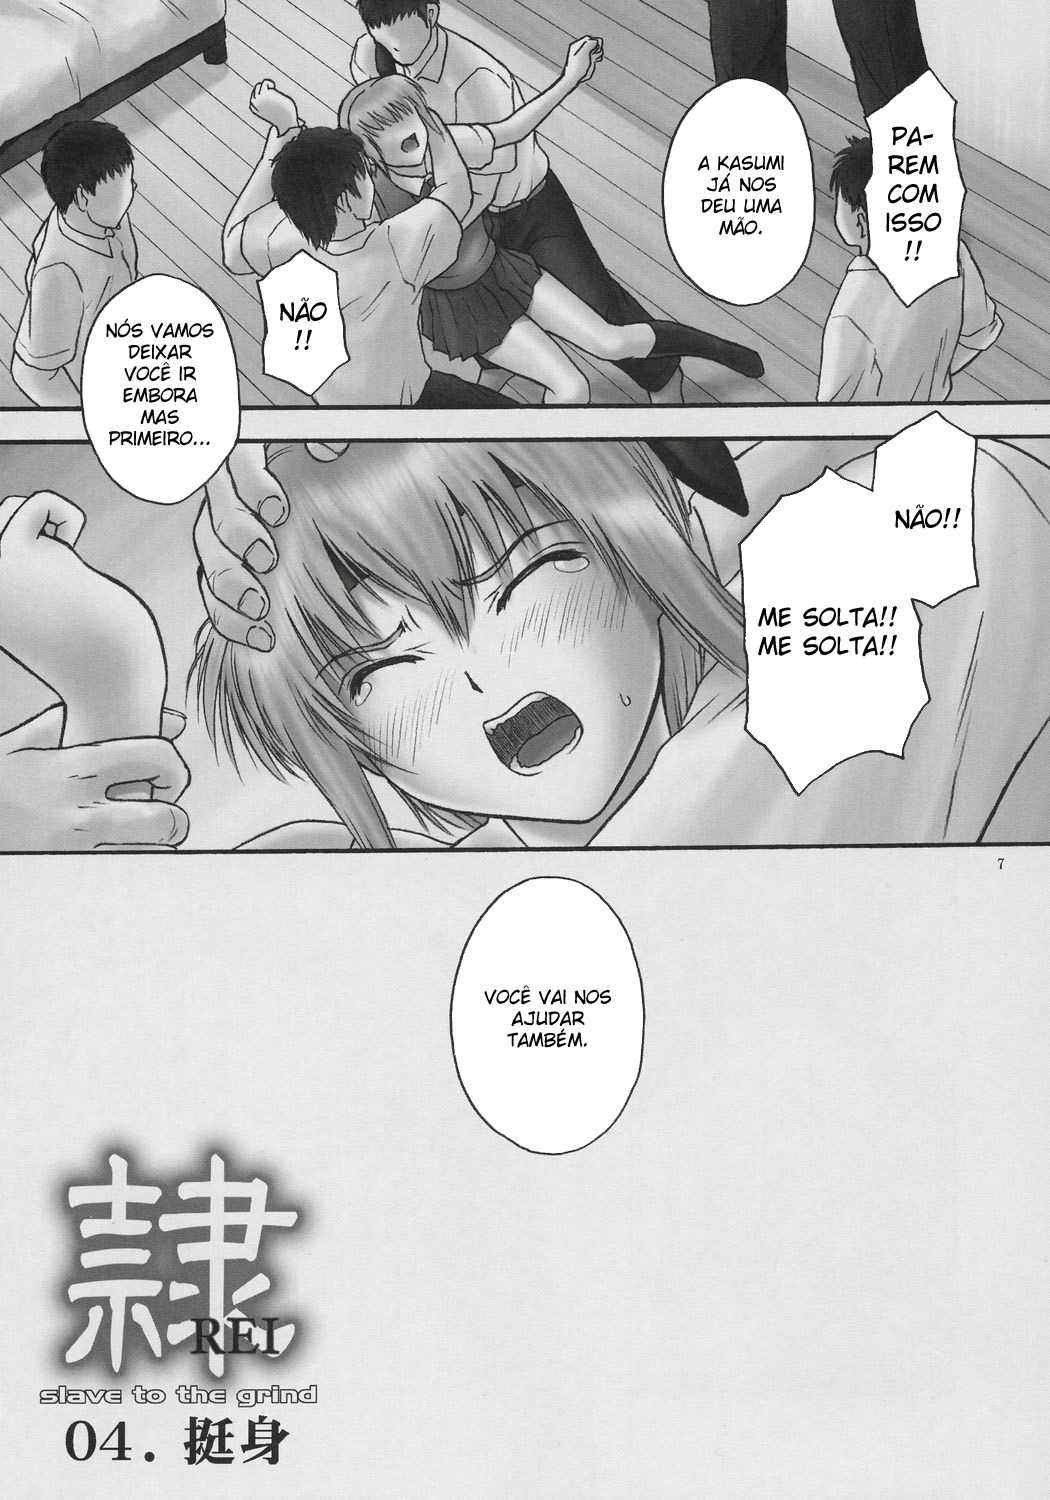 (C71) [Hellabunna (Iruma Kamiri)] Rei Chapter 03: Involve Slave to the Grind (Dead or Alive) [Portuguese-BR] (C71) [へらぶな (いるまかみり)] 隷 CHAPTER 03:INVOLVE slave to the grind (デッド・オア・アライヴ) [ポルトガル翻訳]